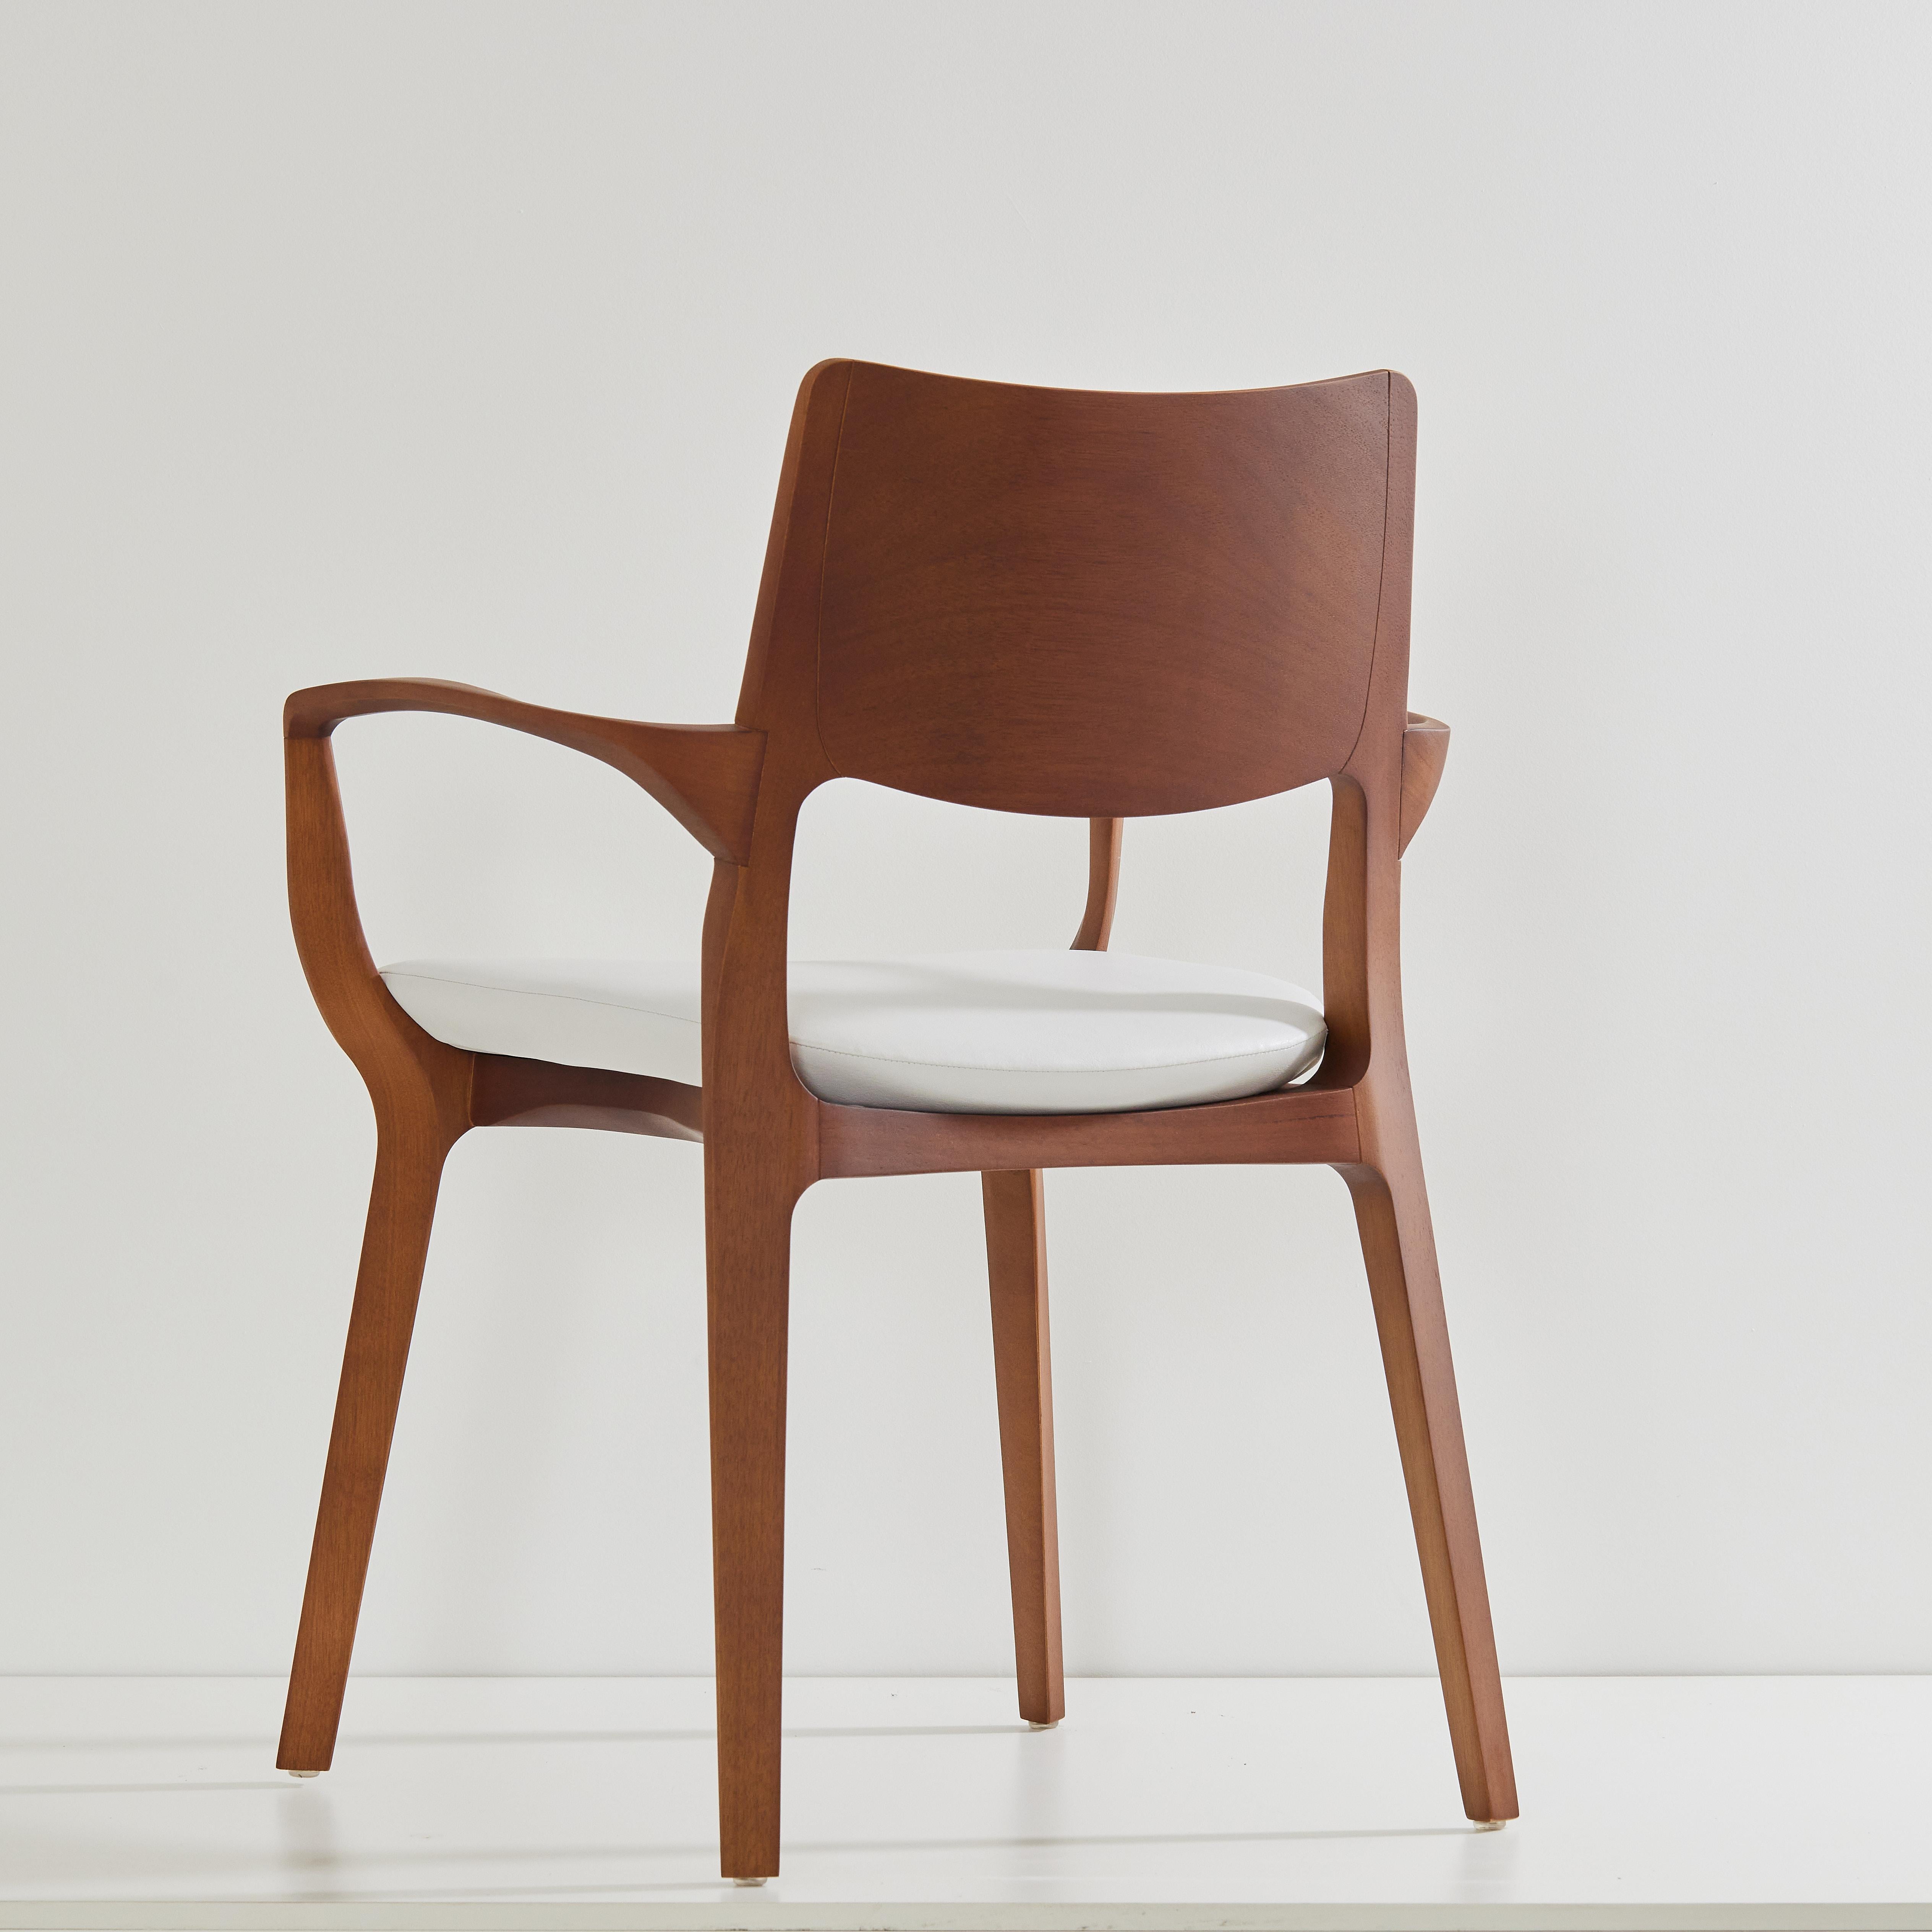 Caning Post-Modern Style Aurora Chair in Walnut Finish with Wooden Back and Textile For Sale